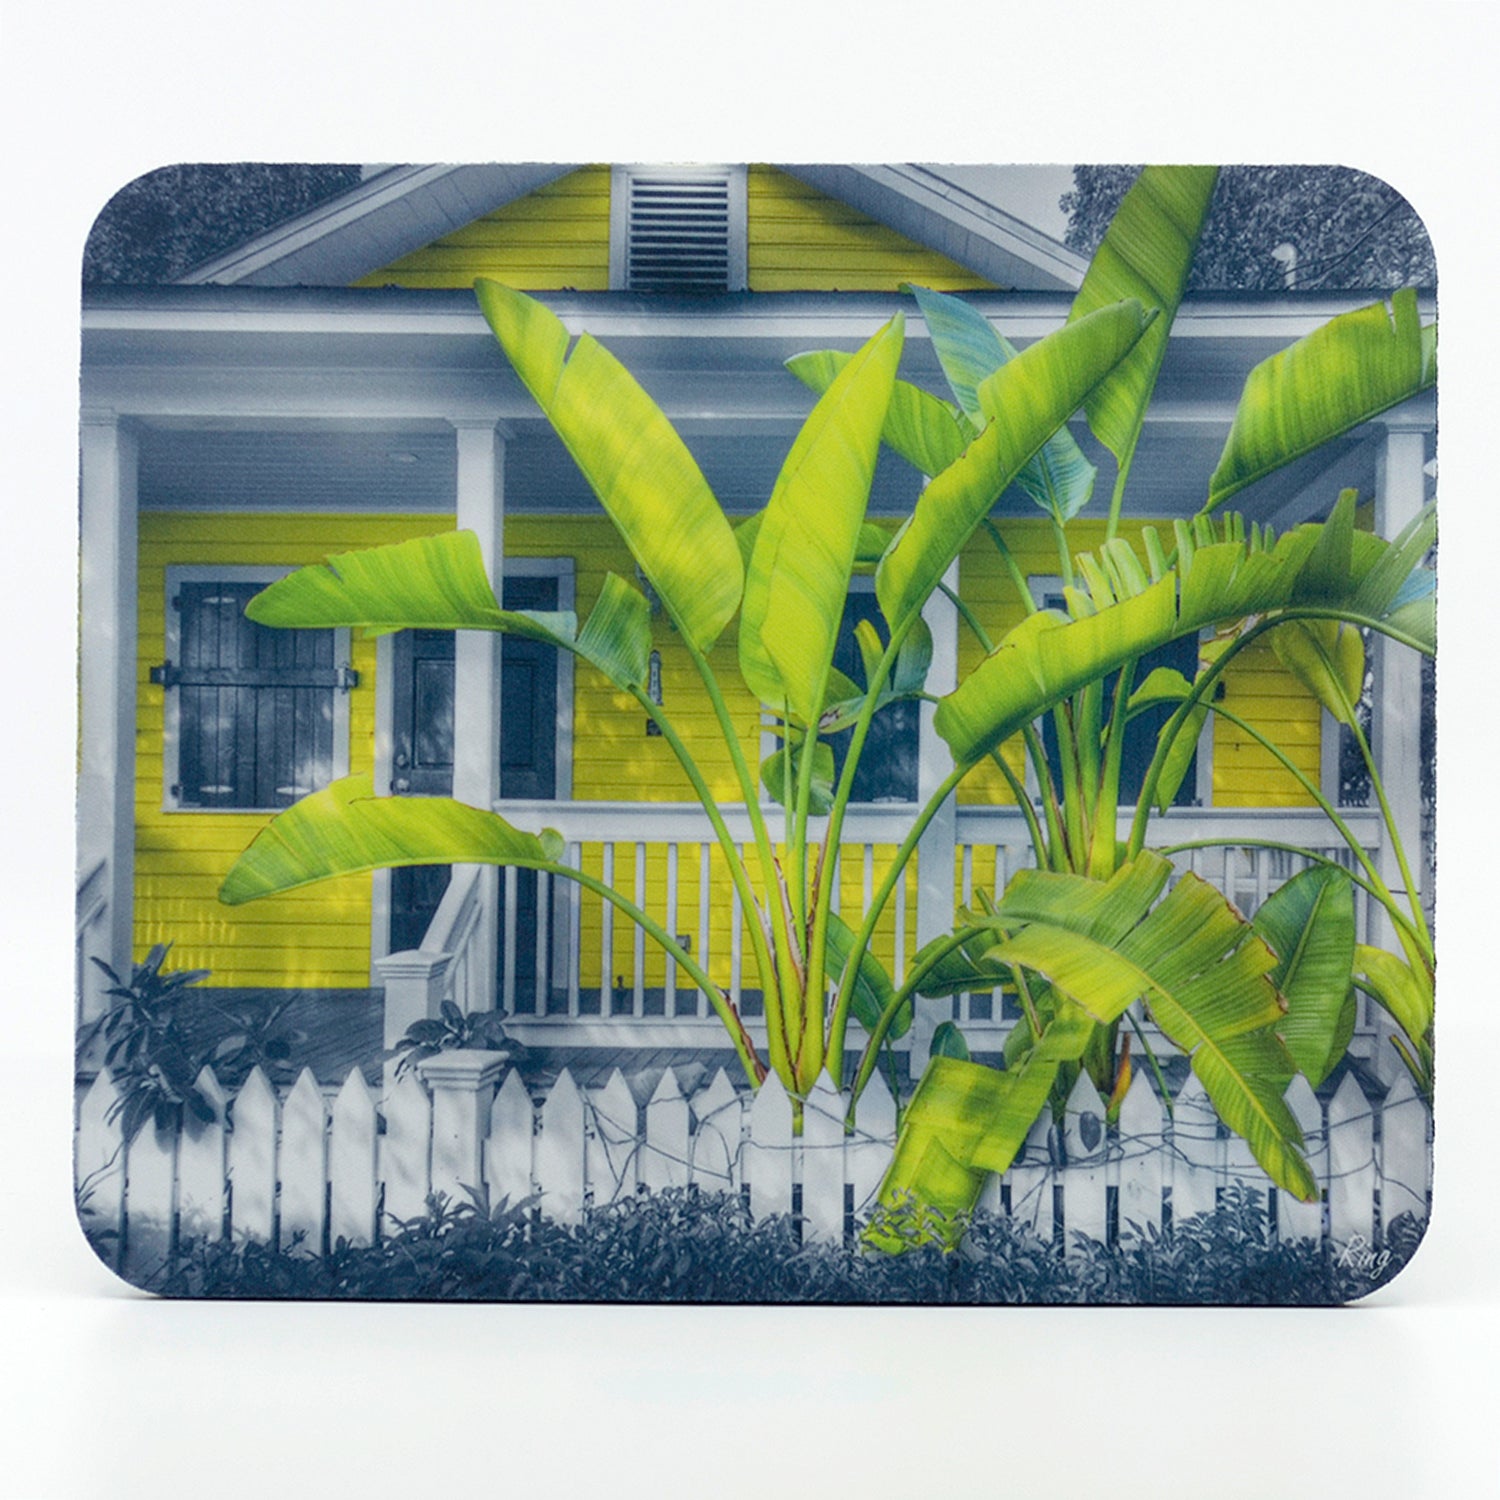 Caribbean Cottage Photograph on a Rectangle Rubber Mouse Pad